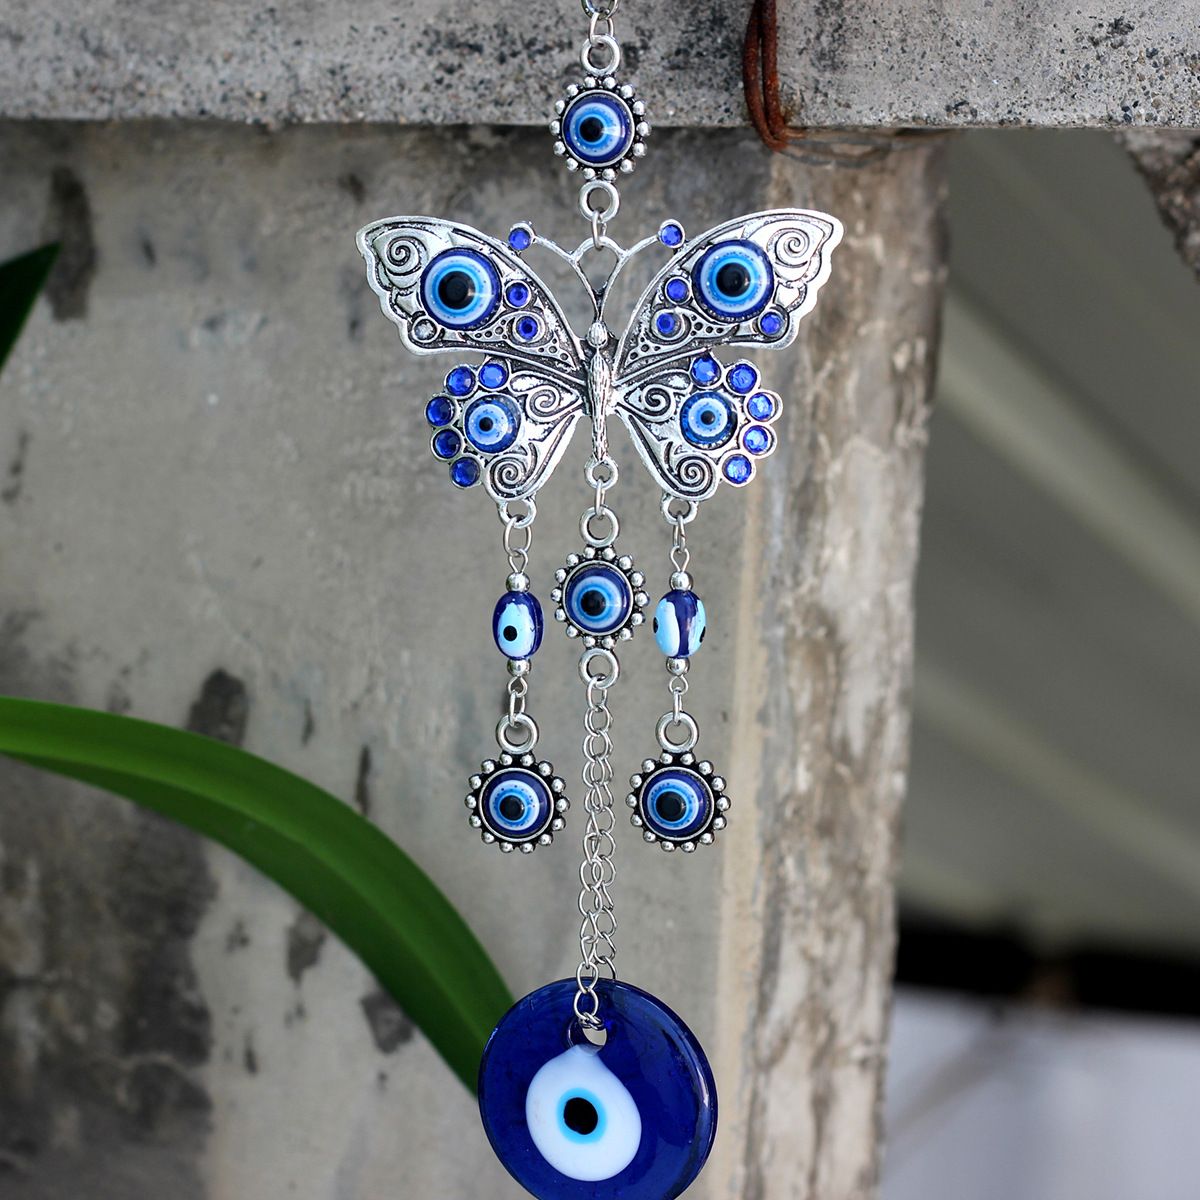 Car Pendant Rear View Mirror Butterfly Hanging Ornament Evil Eye Navy Blue 